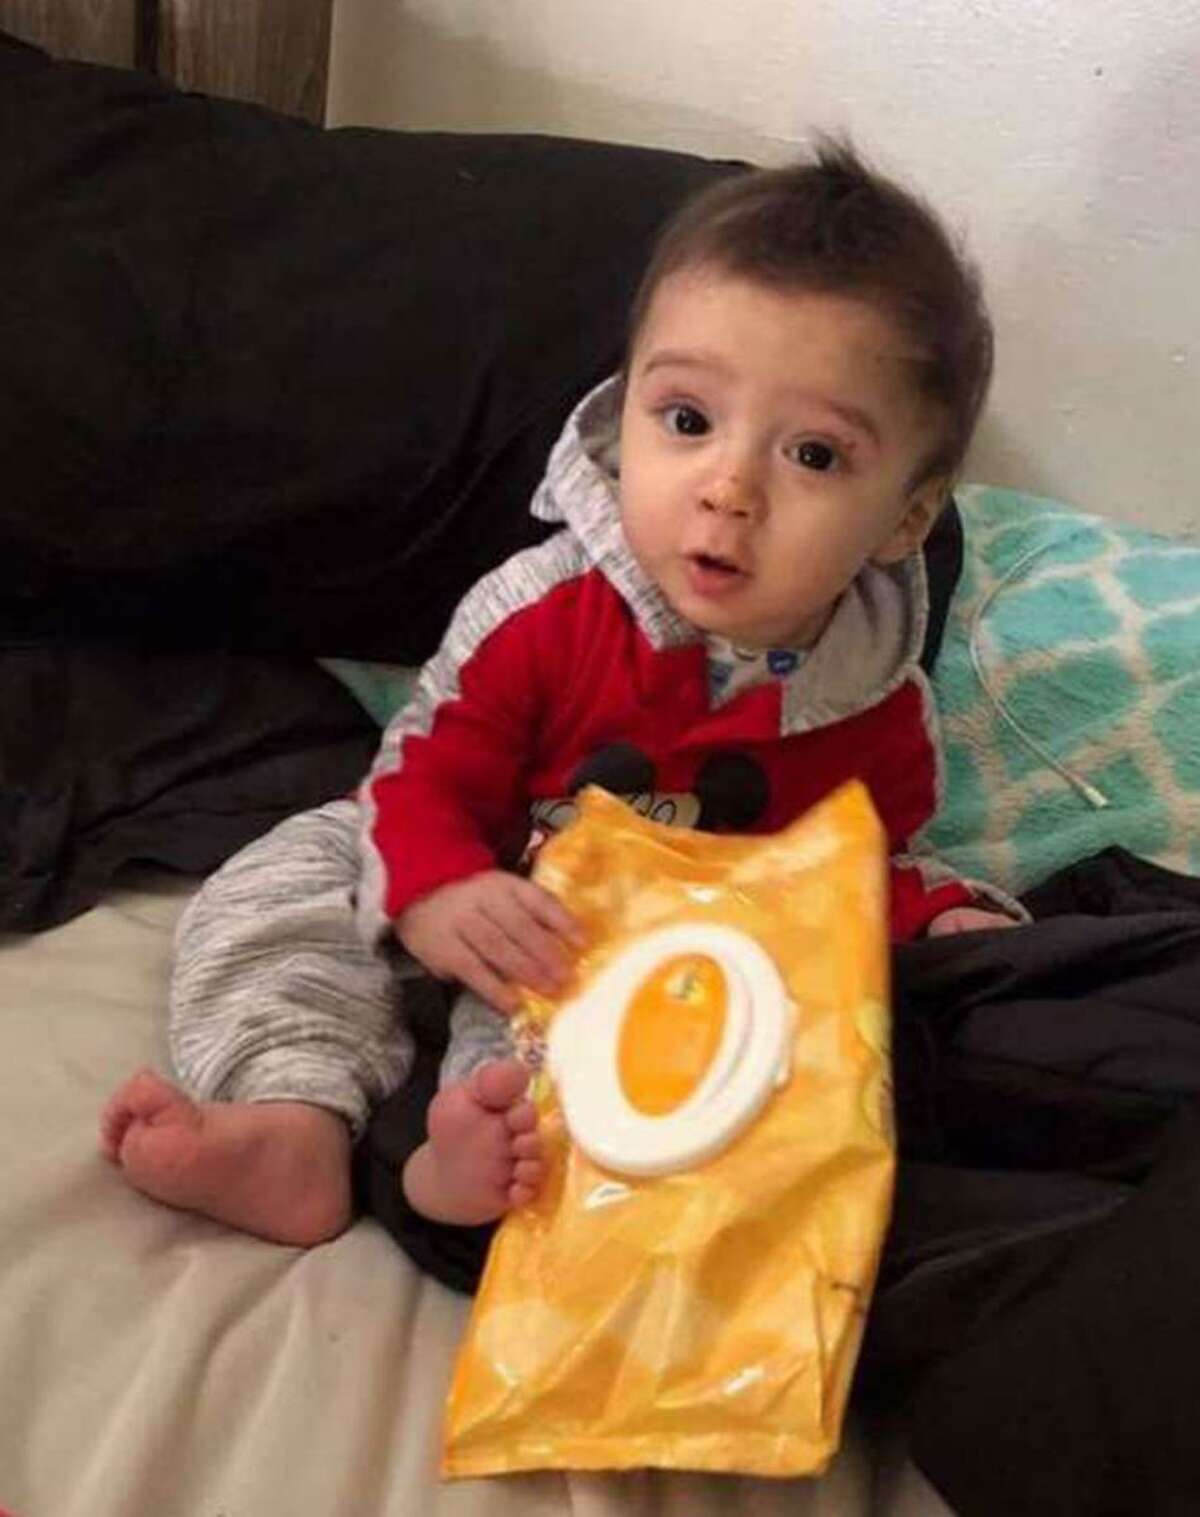 King Jay Davila, 8 months old, was reported missing Jan. 4, 2019, after a car theft at a gas station. Police found the report was false, used to cover up King Jay’s death. His mother’s fiance was later charged.